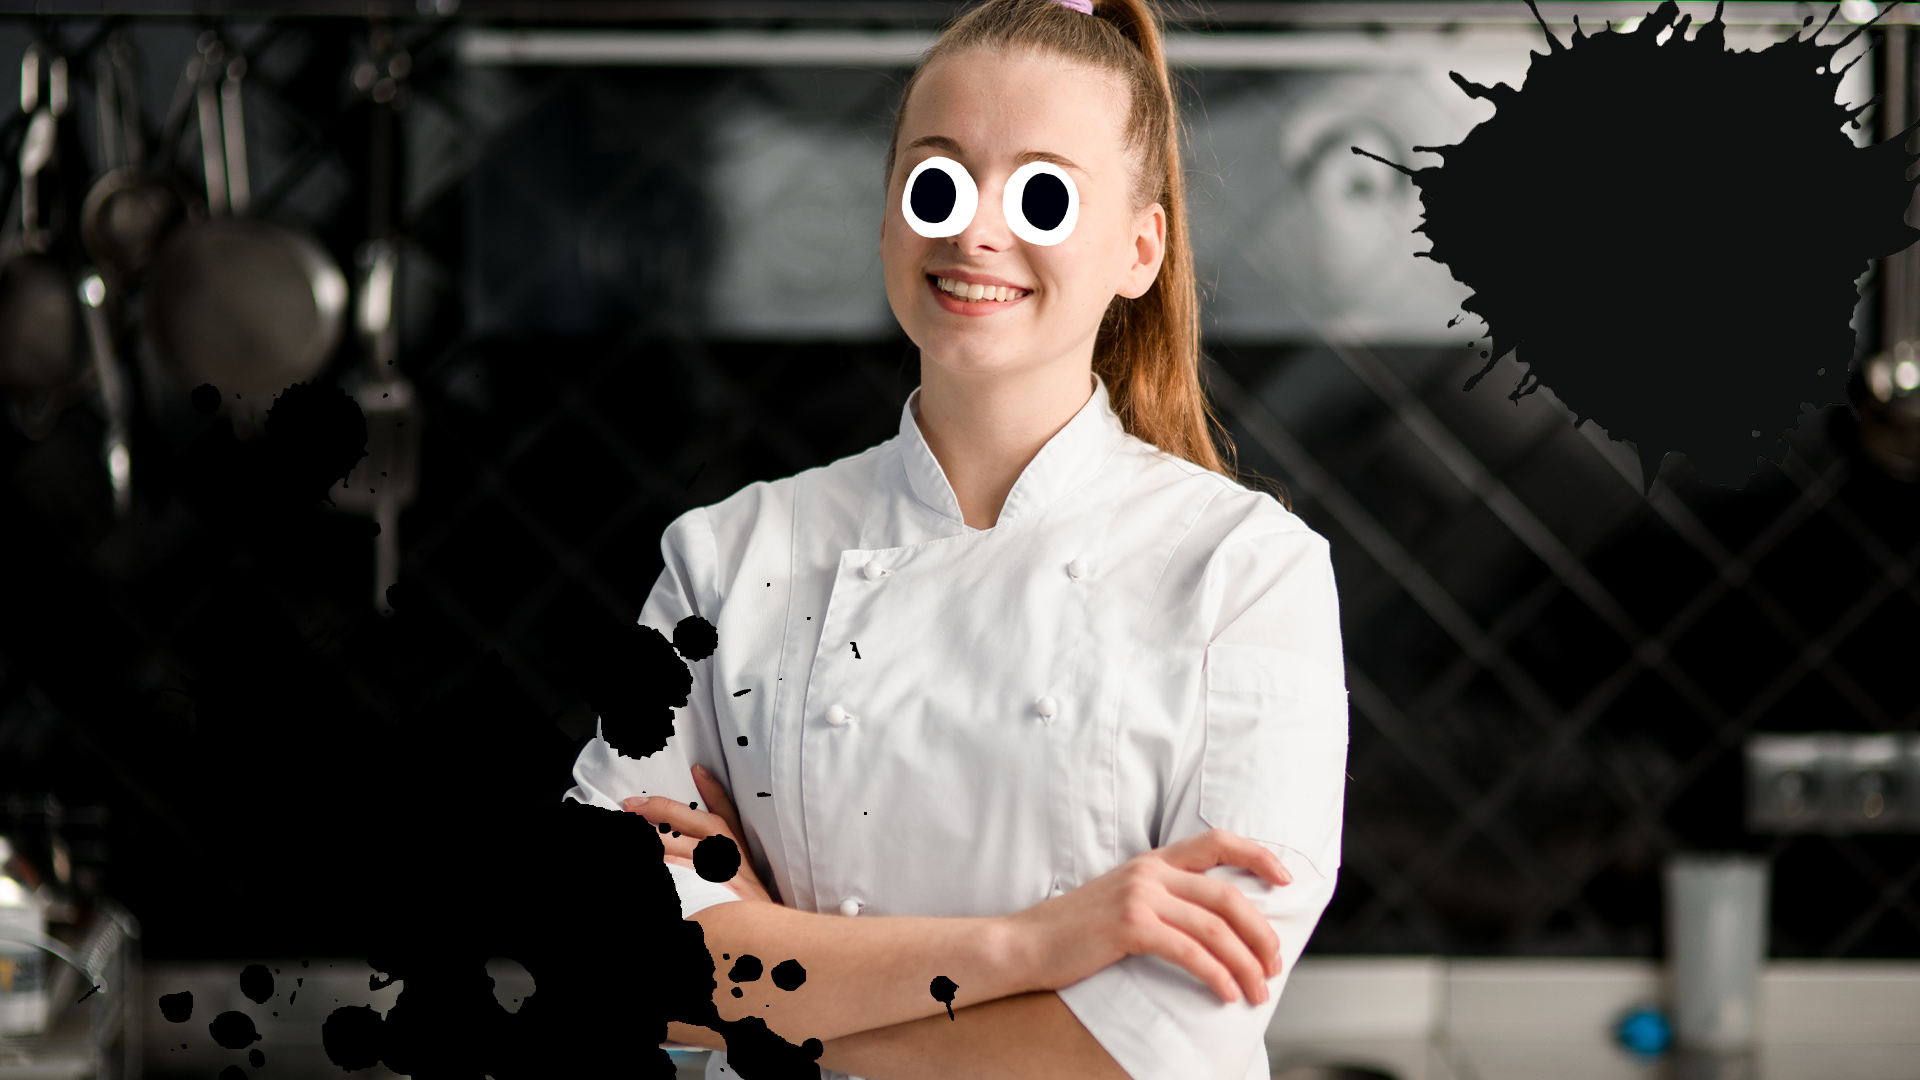 Smiling female chef with splats